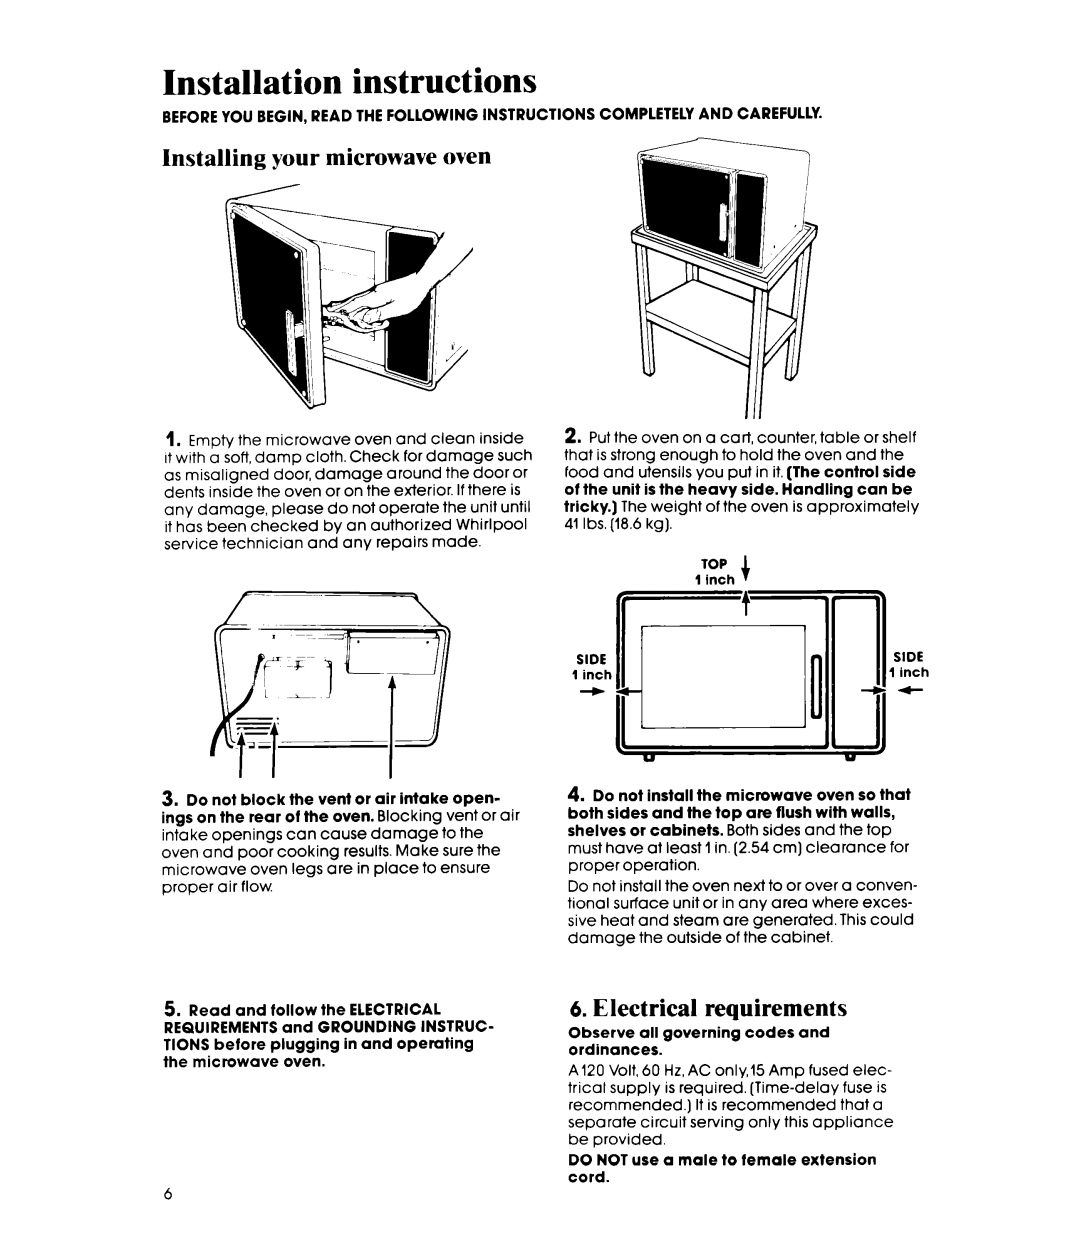 Whirlpool MW3500XM manual Installation instructions, Installing your microwave oven, Electrical requirements 